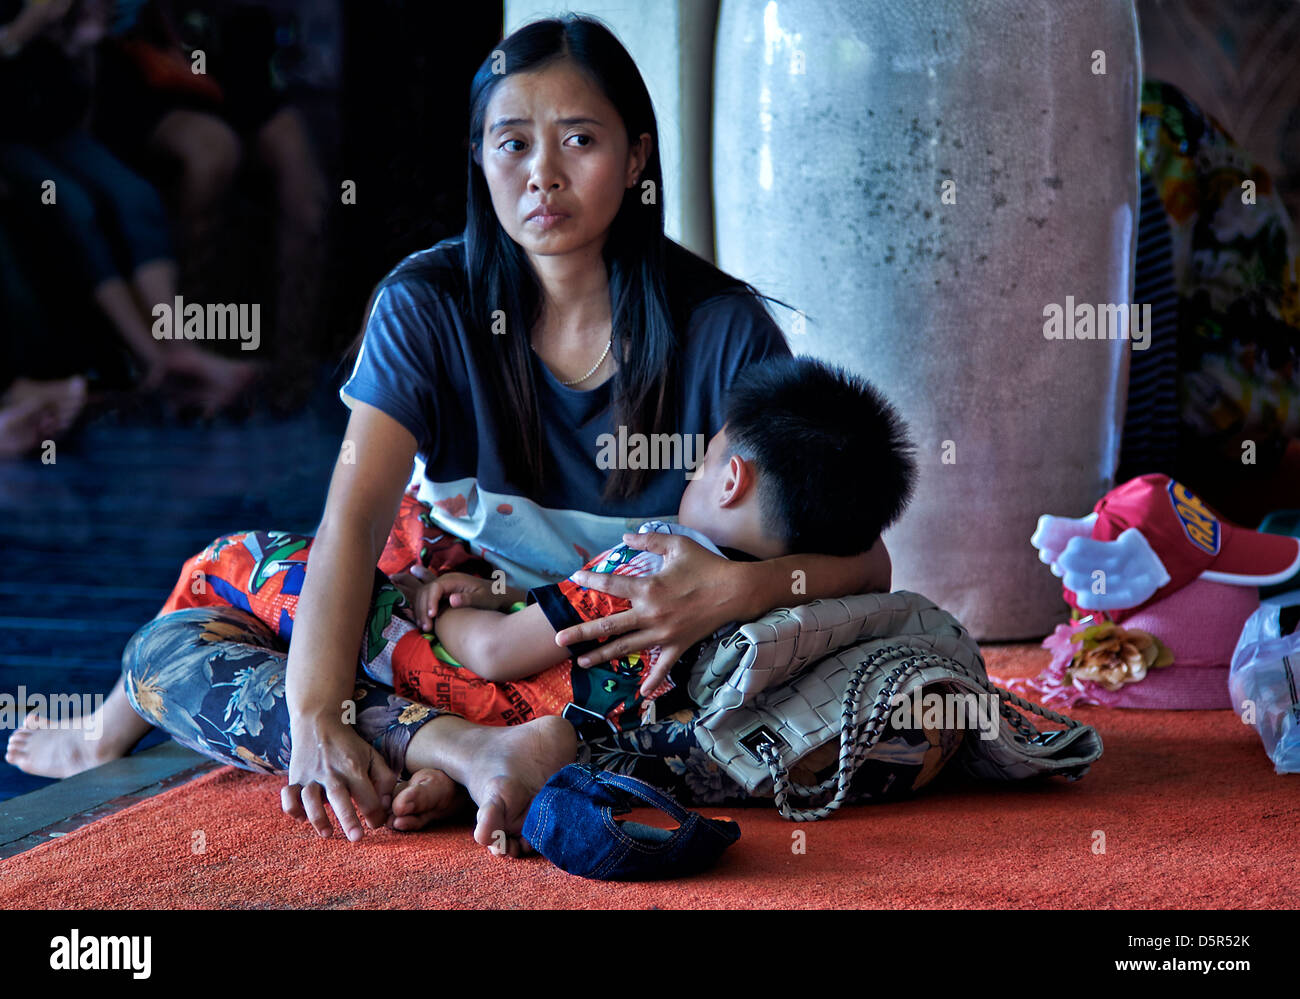 Worried mother. Concerned and anxious Thai mother cradles her child whilst awaiting a doctors consultation. Thailand South East Asia Stock Photo